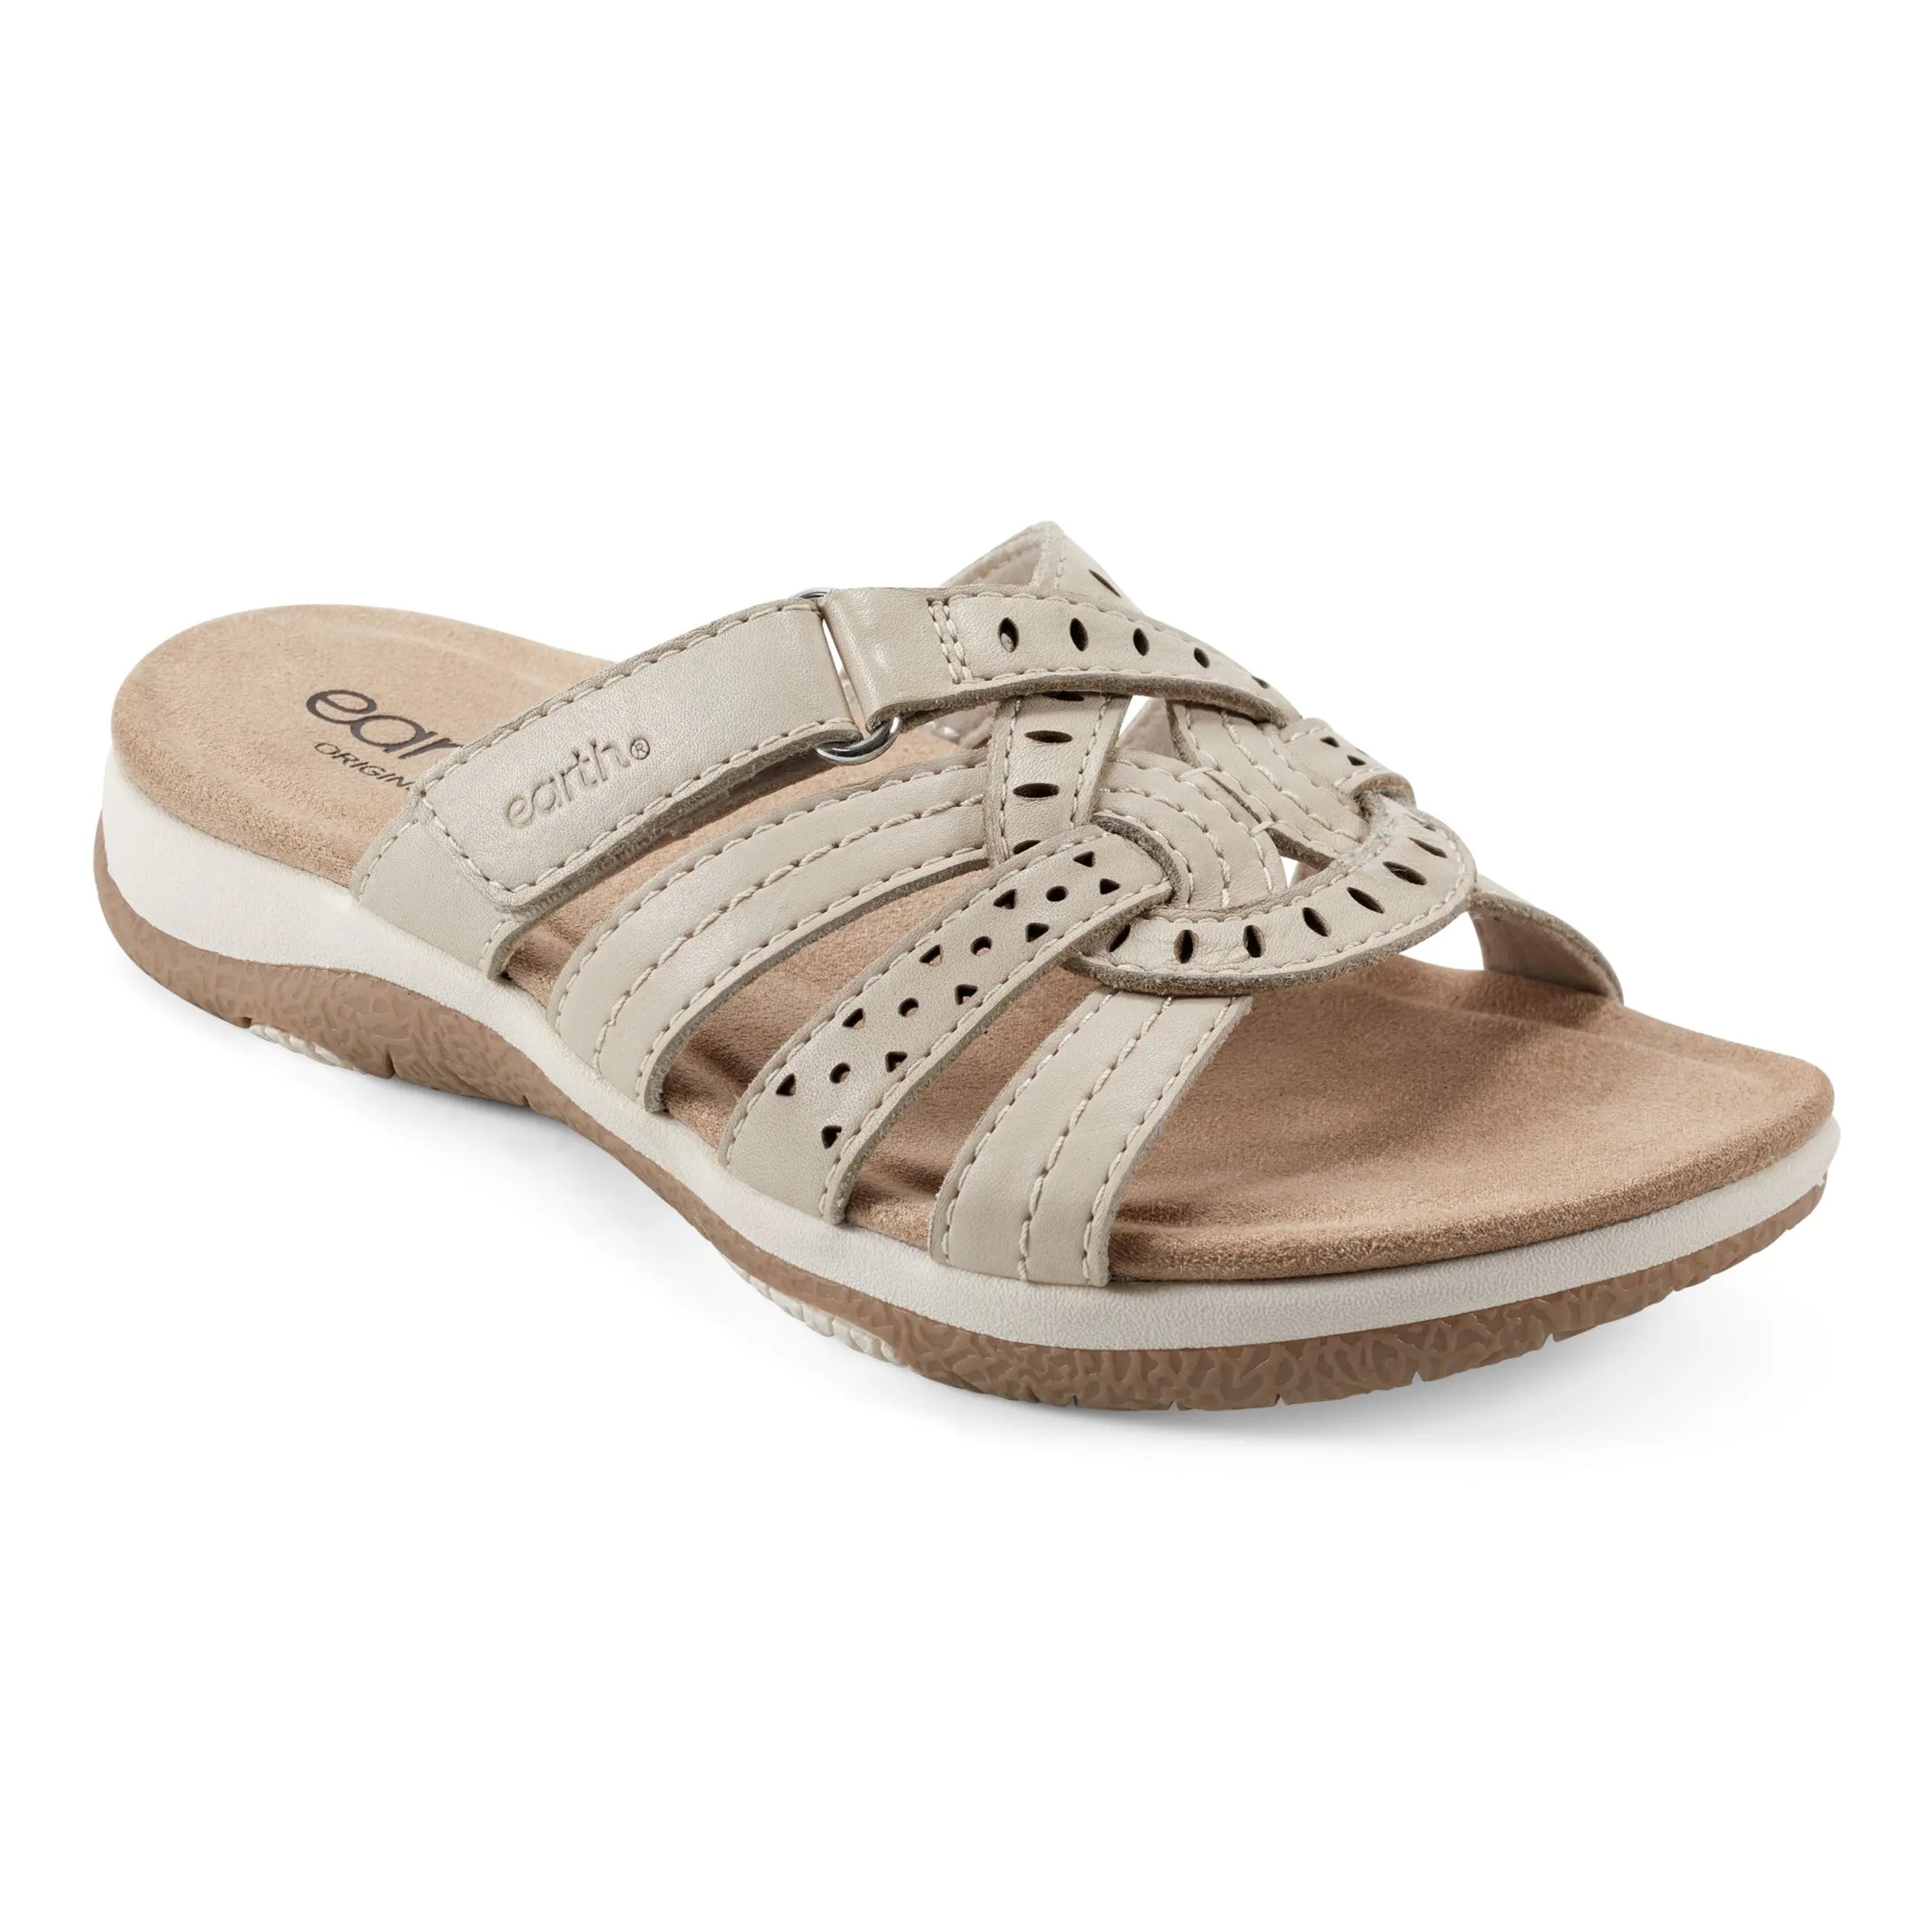 Sassoni Strappy Casual Slip-On Flat Sandals